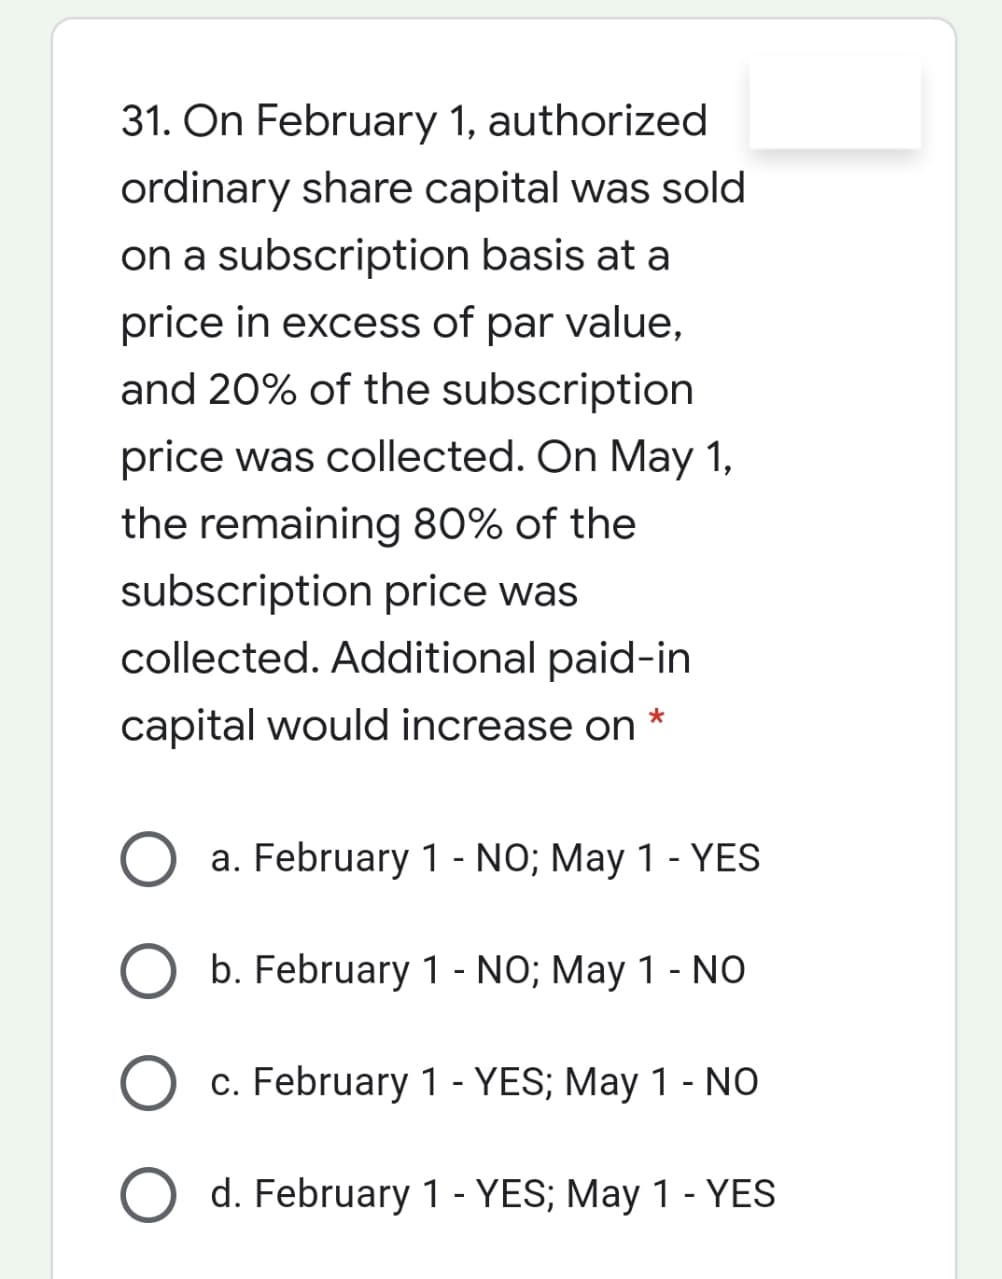 31. On February 1, authorized
ordinary share capital was sold
on a subscription basis at a
price in excess of par value,
and 20% of the subscription
price was collected. On May 1,
the remaining 80% of the
subscription price was
collected. Additional paid-in
capital would increase on
a. February 1 - NO; May 1 - YES
b. February 1 - NO; May 1 - NO
c. February 1 - YES; May 1 - NO
d. February 1 - YES; May 1 - YES
